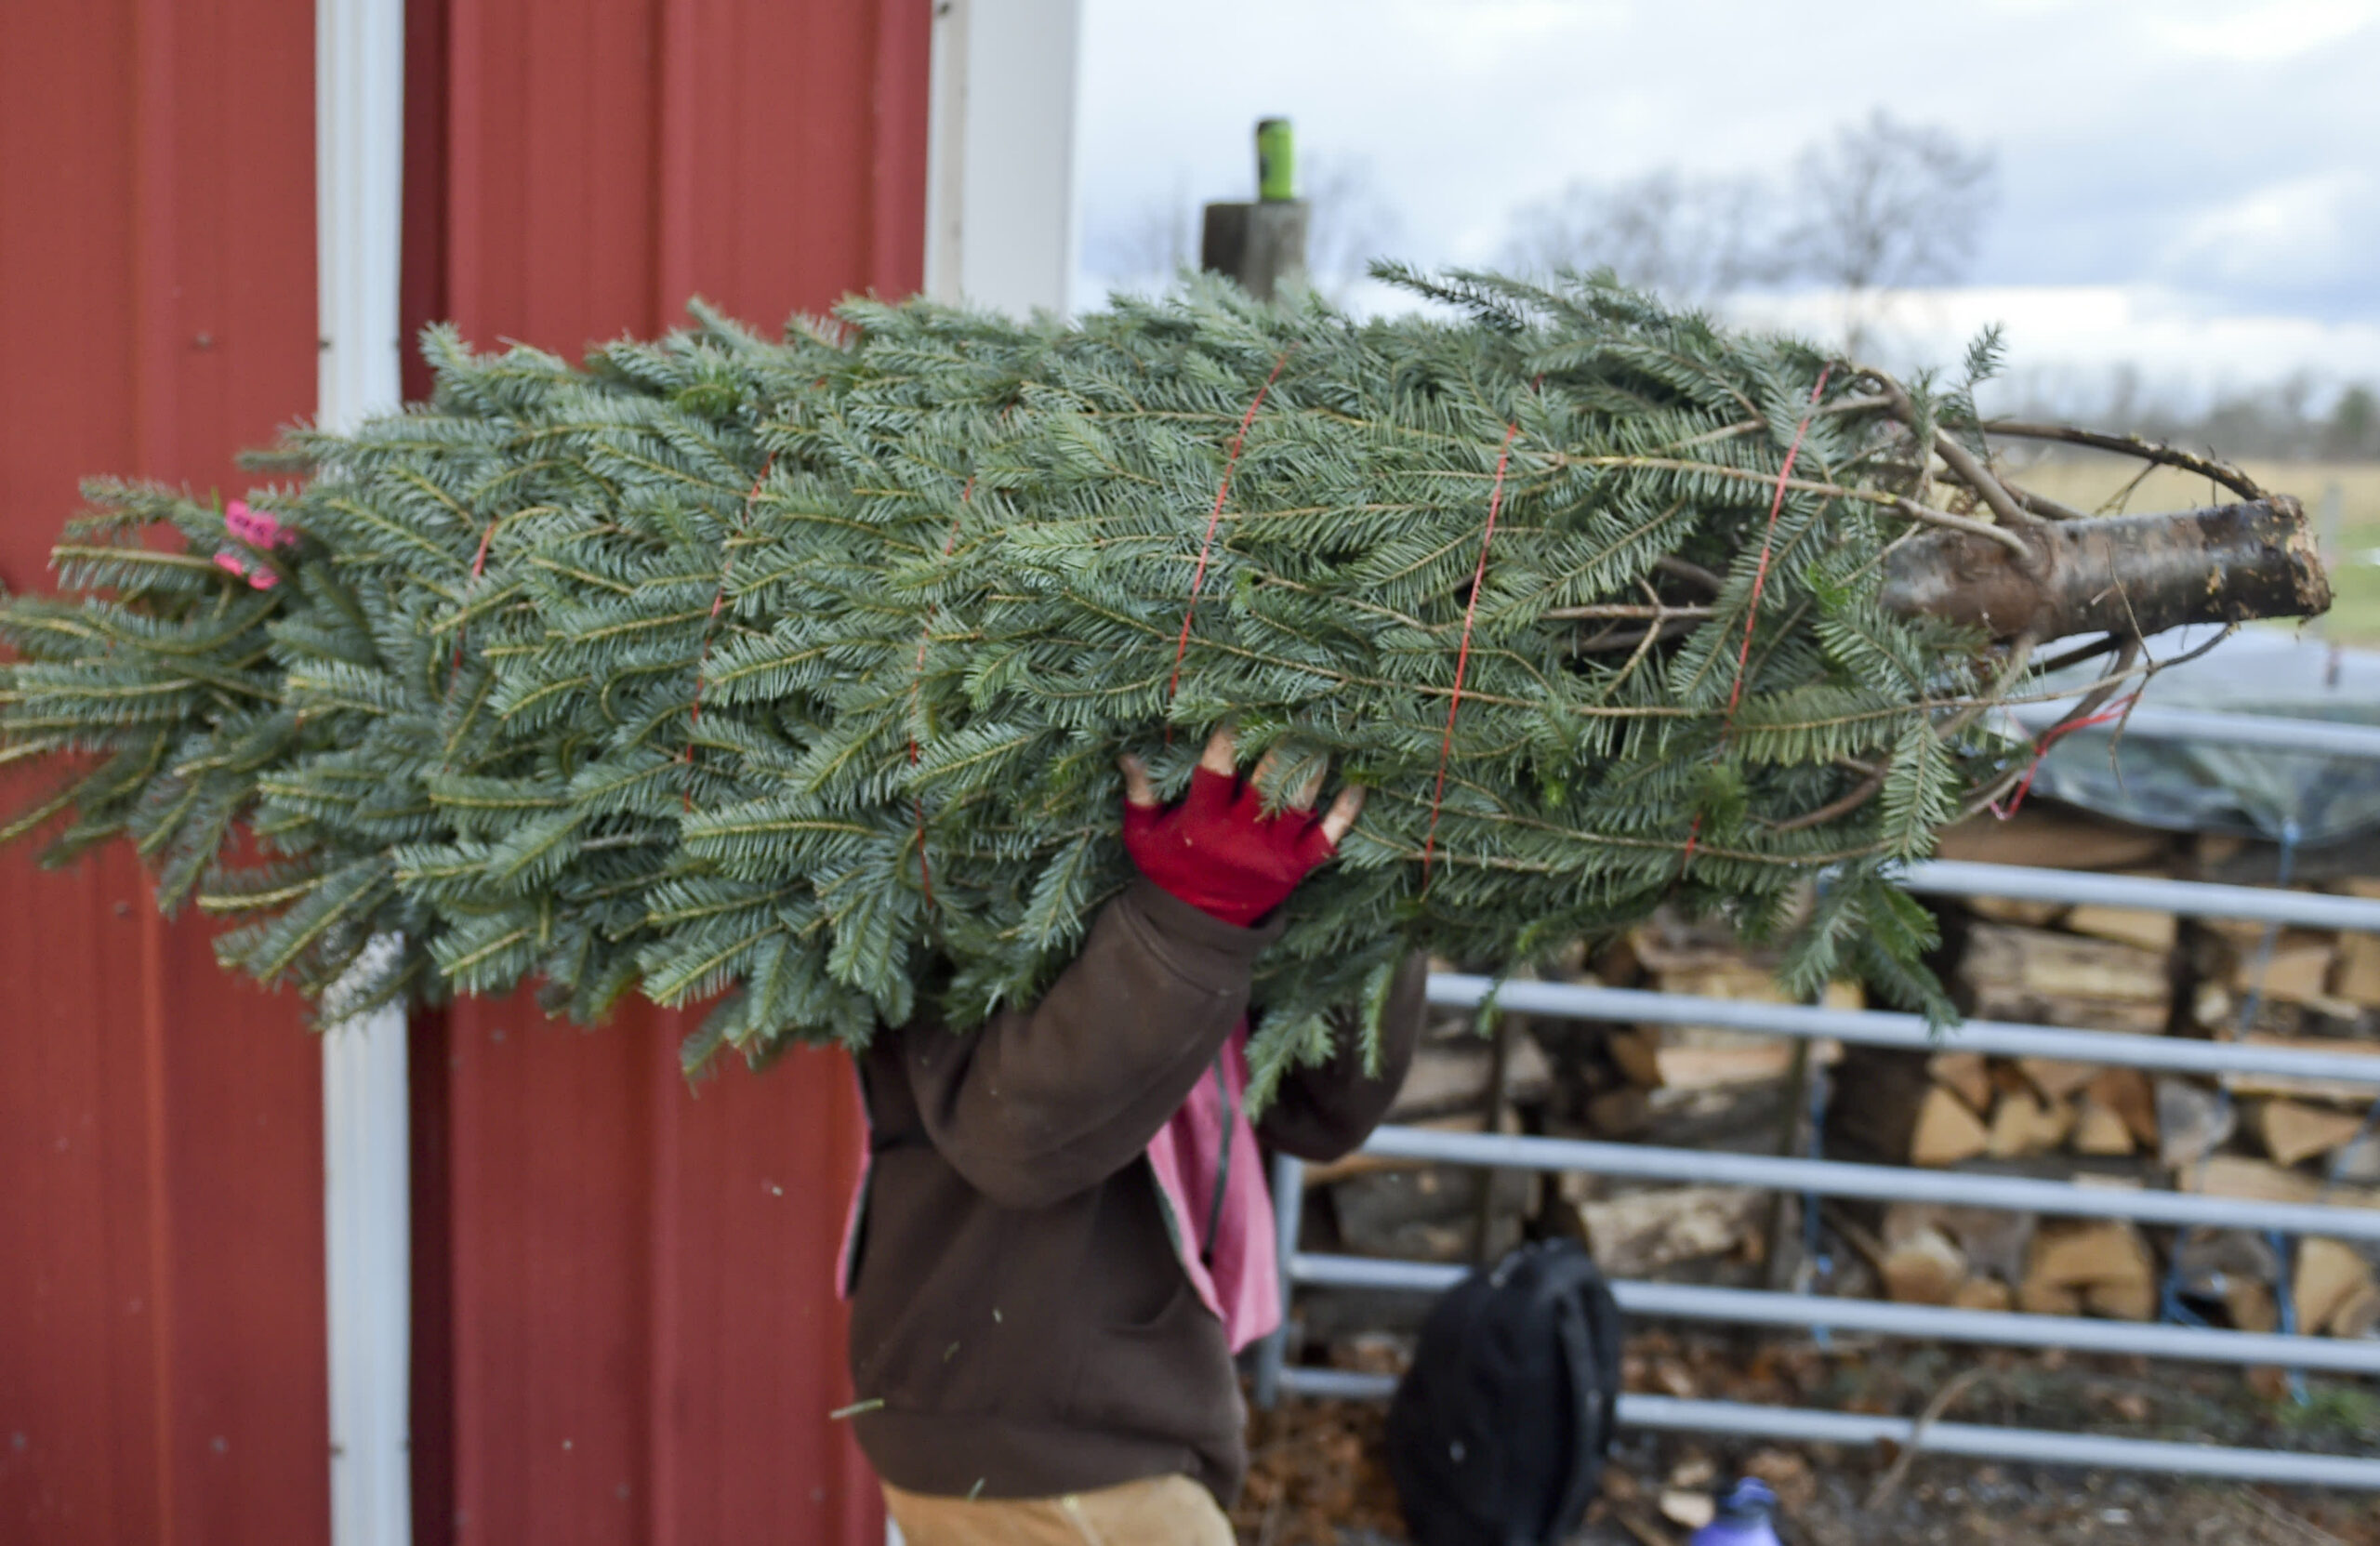 Christmas tree shortage because of supply chain issues, climate change